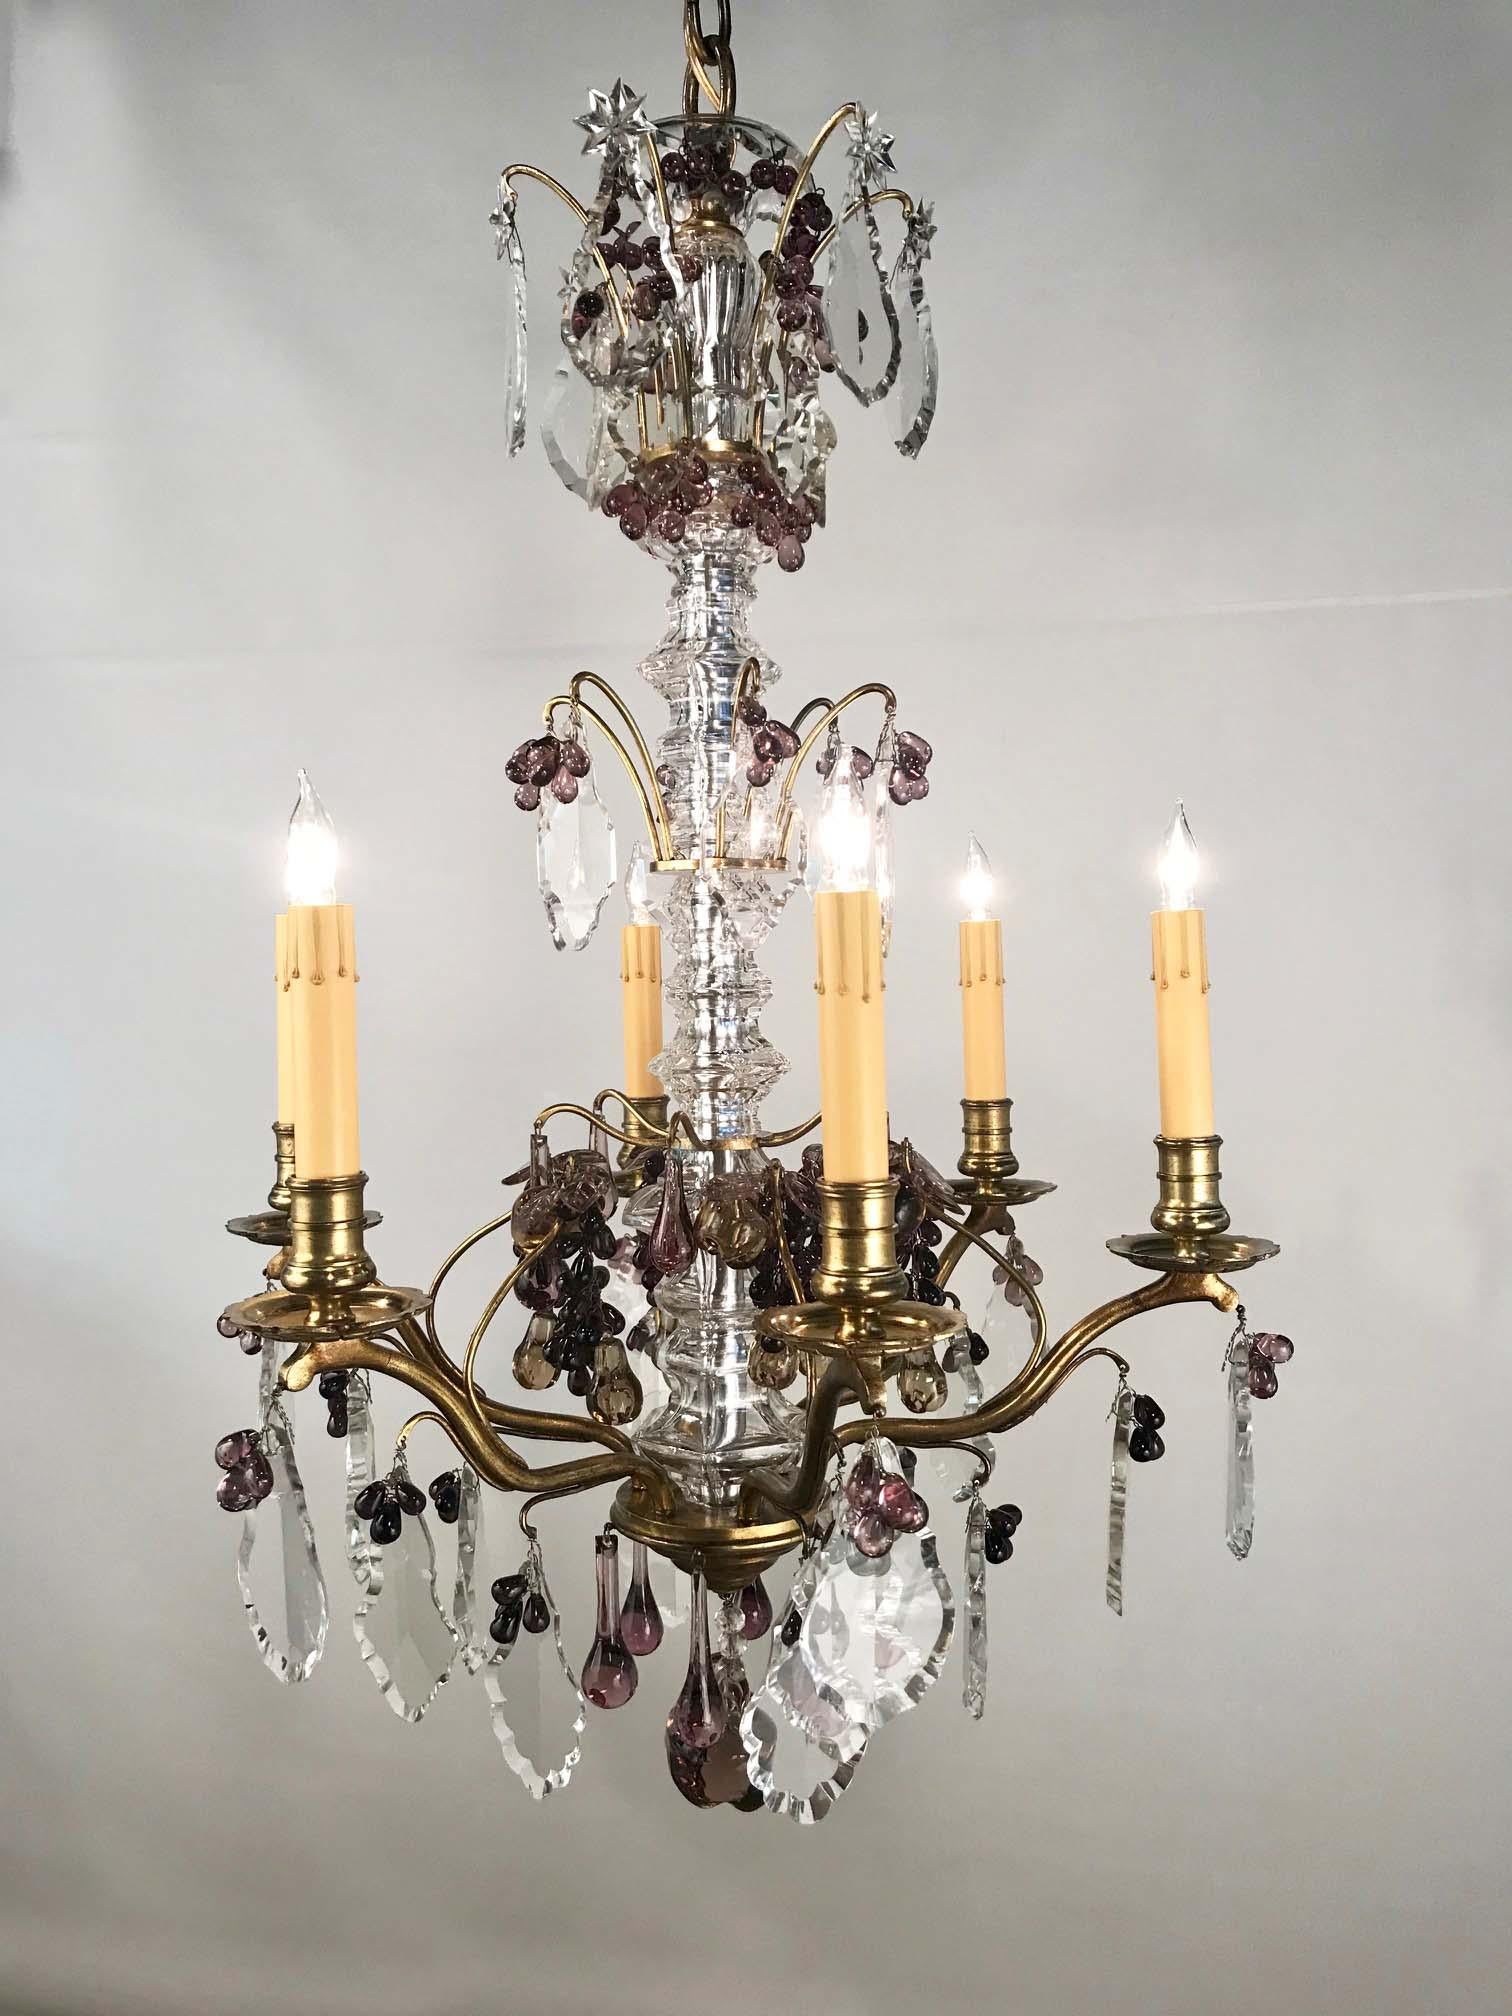 It has a stem sheathed in molded glass. The arms are hung with an unusually good variety of crystals, some amethyst. There are grapes, pendant fruits, leaves and long globular drops, the overall effect is playful yet high quality.